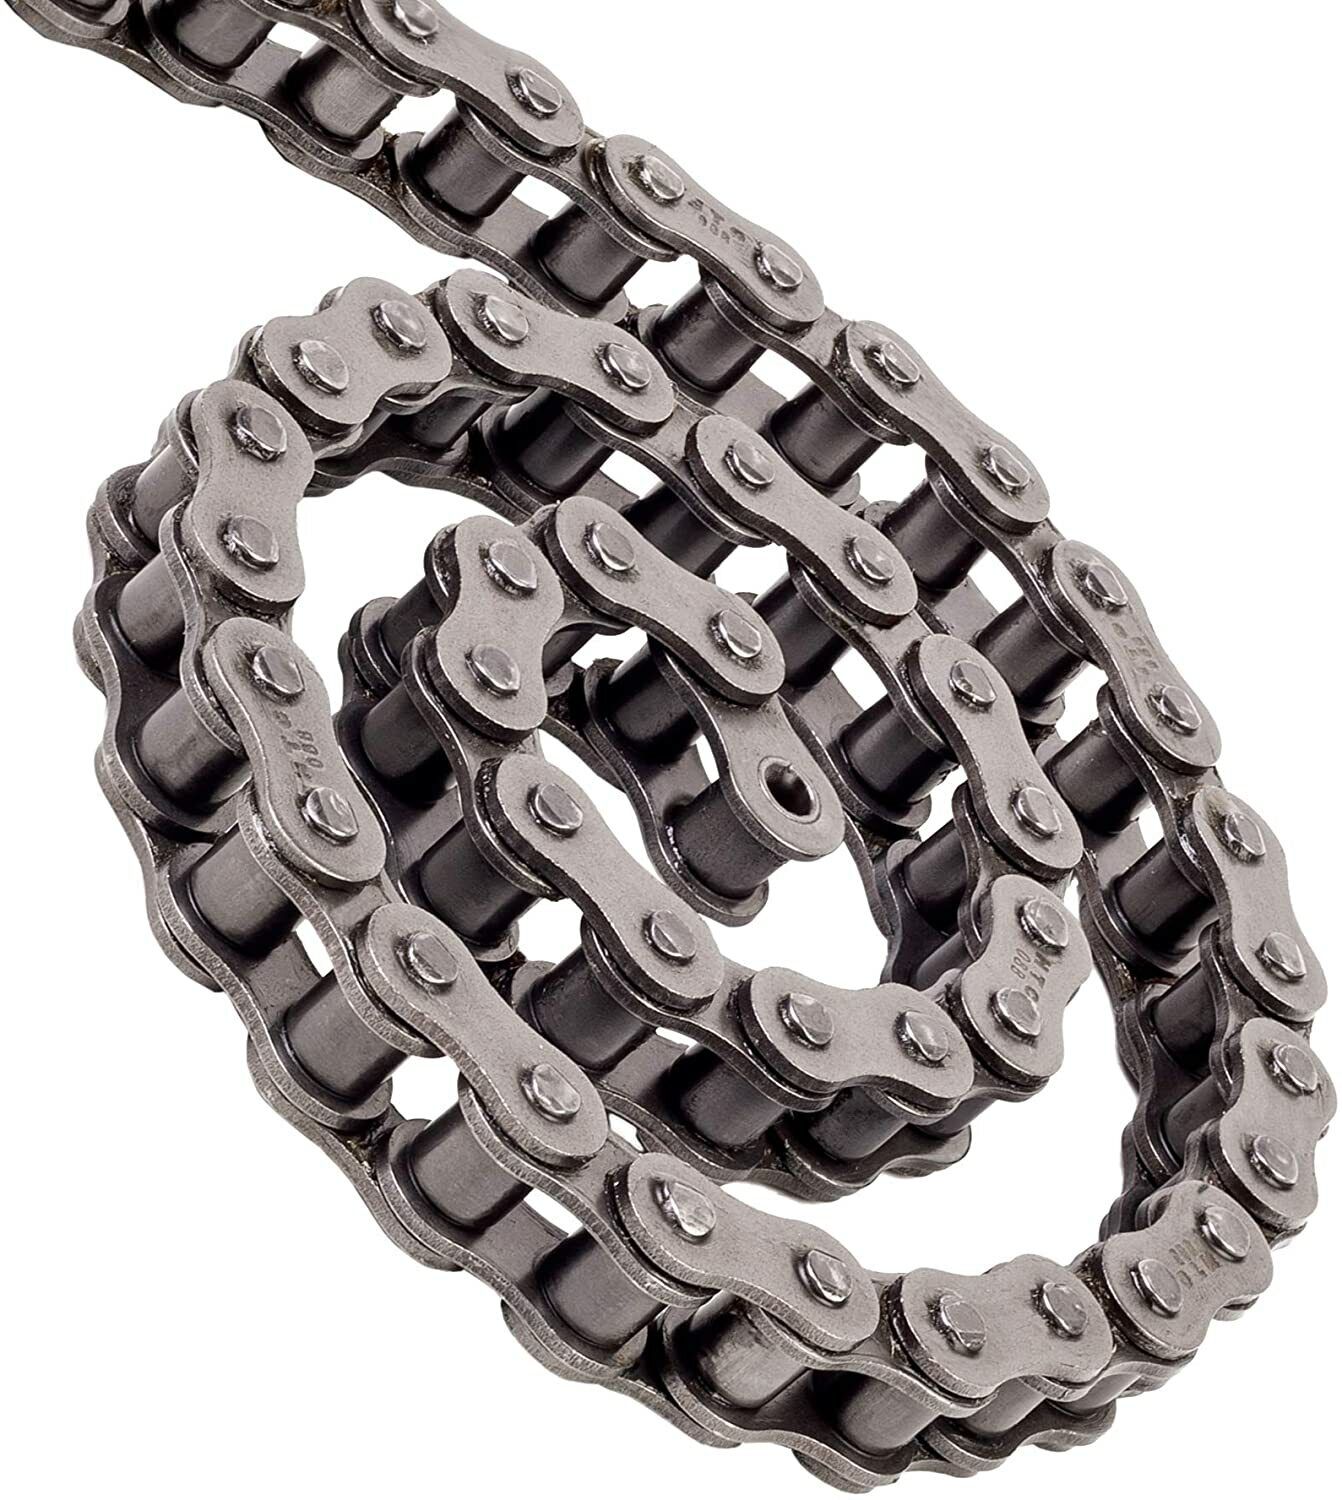 Roller chain wear and elongation